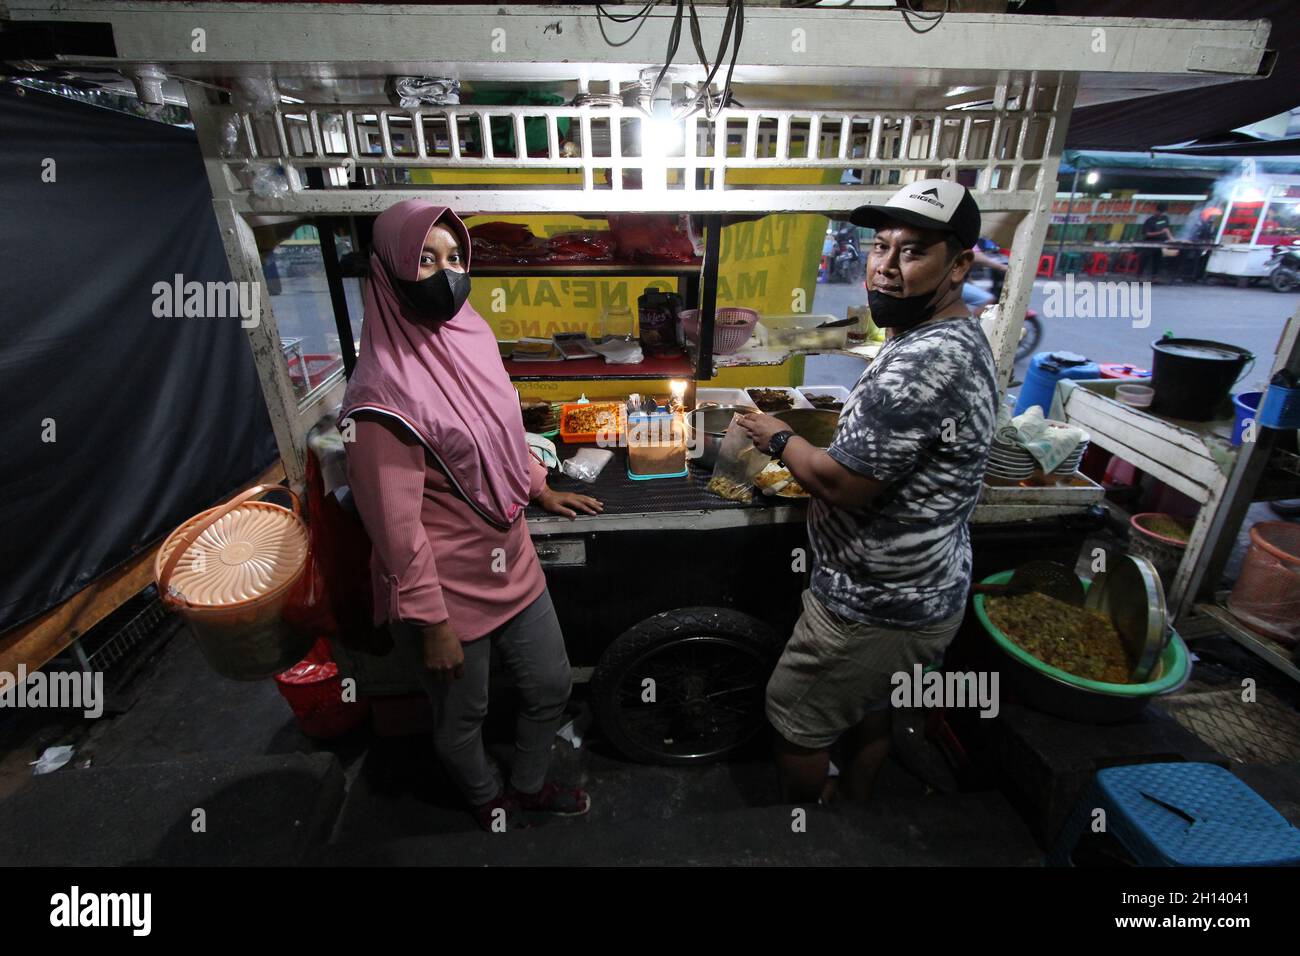 Karawang, Indonesia. 15th Oct, 2021. Endi, 39, the son-in-law of the shop owner and his wife Devi, 32, the daughter of one of the owners of the Soto Tangkar stall, Mang Nean, who has been selling since 1980, poses for a photo at the legendary food stall Soto Tangkar typical of Karawang on Jalan Dewi Sartika, West Karawang, Karawang, West Java, Indonesia. This soto dish uses beef ribs and beef leg veins seasoned with turmeric and chili. It tastes savory and slightly sweet. Interestingly, this delicious dish is cooked traditionally. Almost all ingredients are steamed in a pot over coals of firew Stock Photo